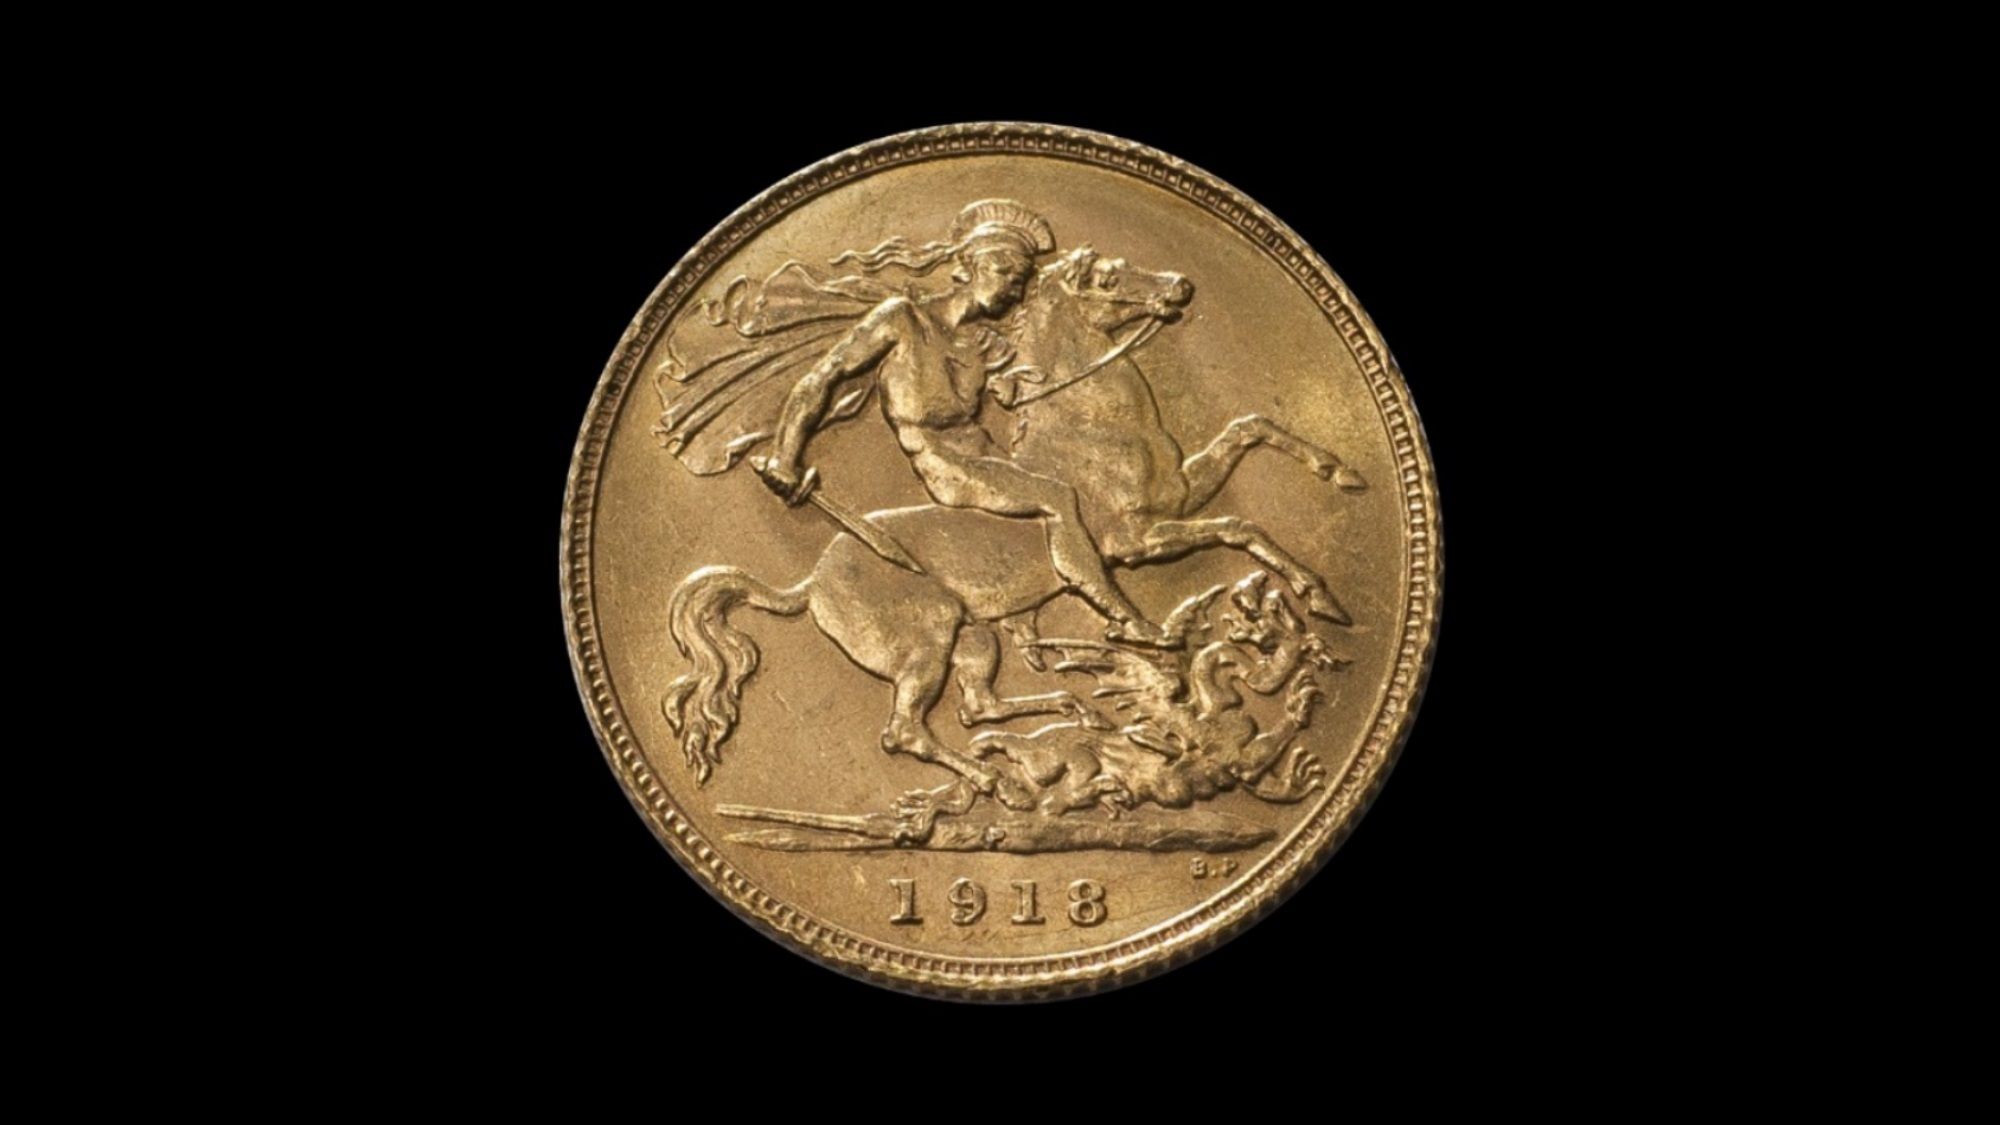 1918 Perth Mint Half Sovereign date side July 2018